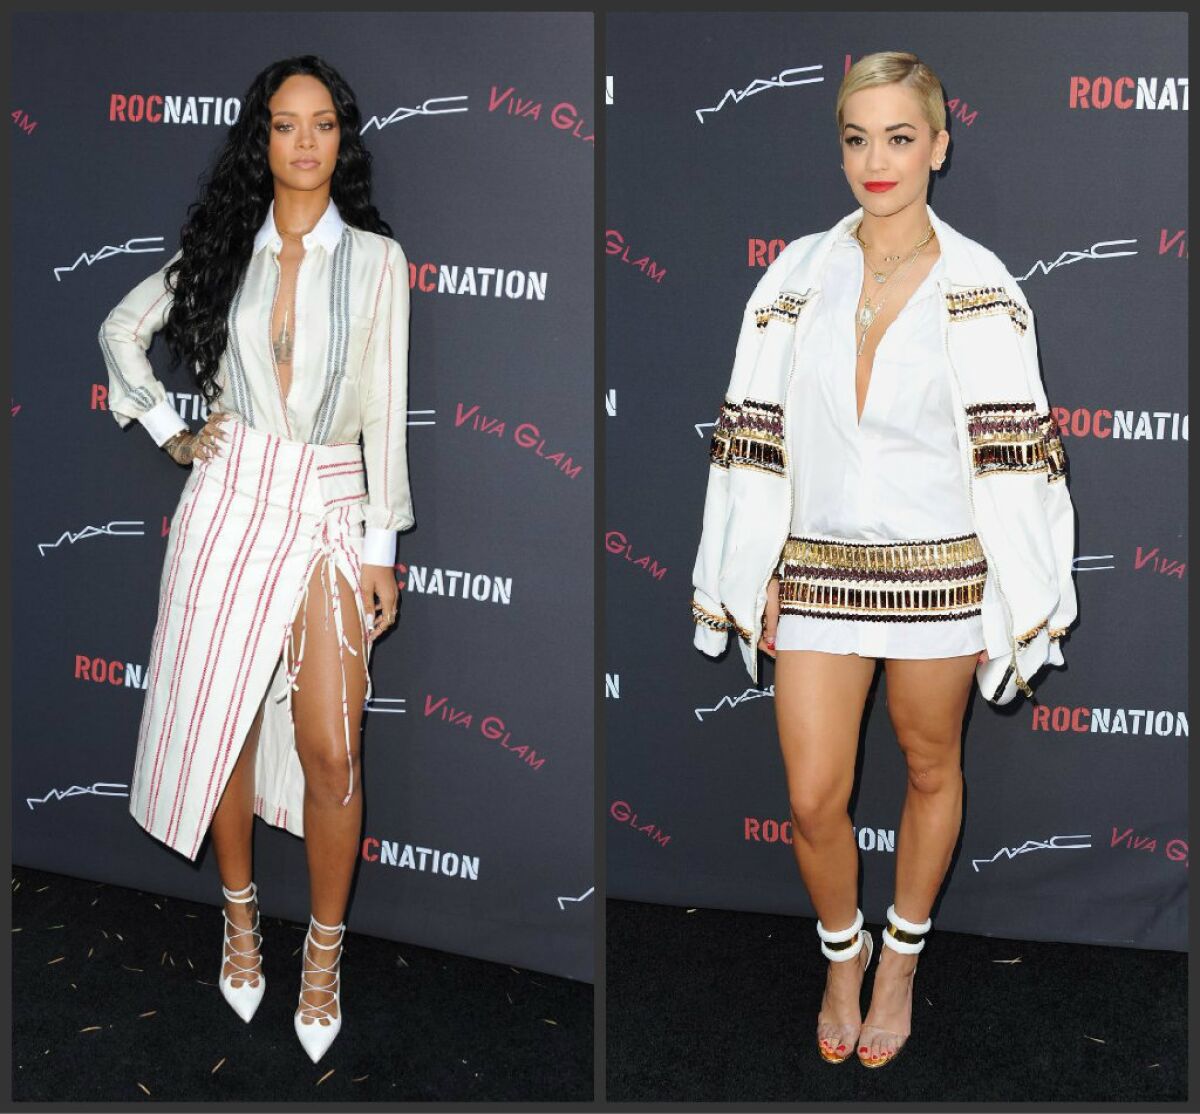 Pop star Rihanna, left, dressed in Altuzarra, arrives at the Roc Nation Pre-Grammy brunch presented by MAC Viva Glam at a private residency on Saturday in Los Angeles. Rita Ora, dressed in Alexandre Vauthier, arrives at the event.